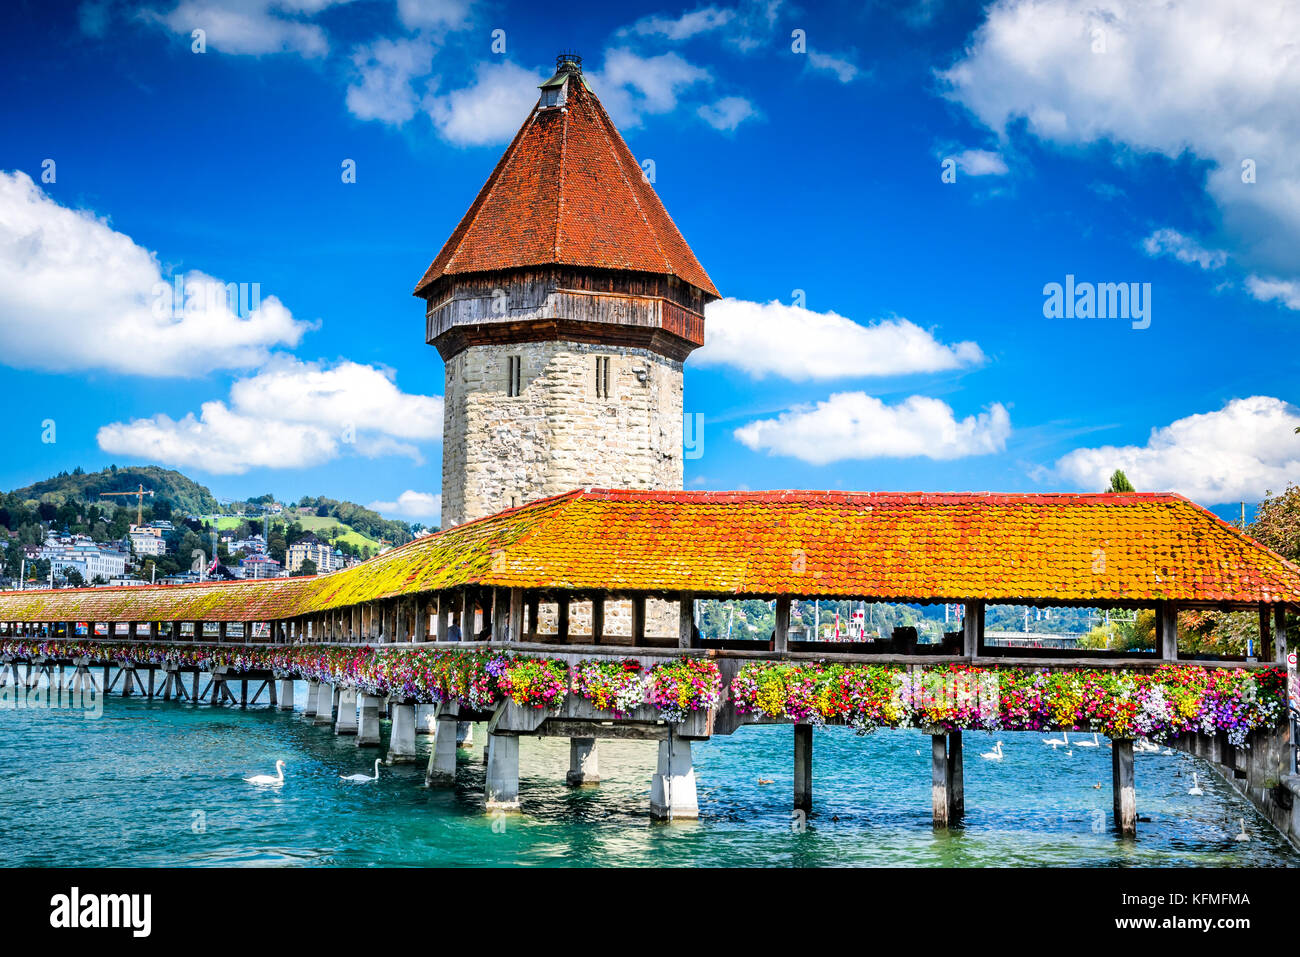 Lucerne, Switzerland - Famous wooden Chapel Bridge, oldest wooden covered bridge in Europe. Luzern, Lucerna in Swiss country. Stock Photo